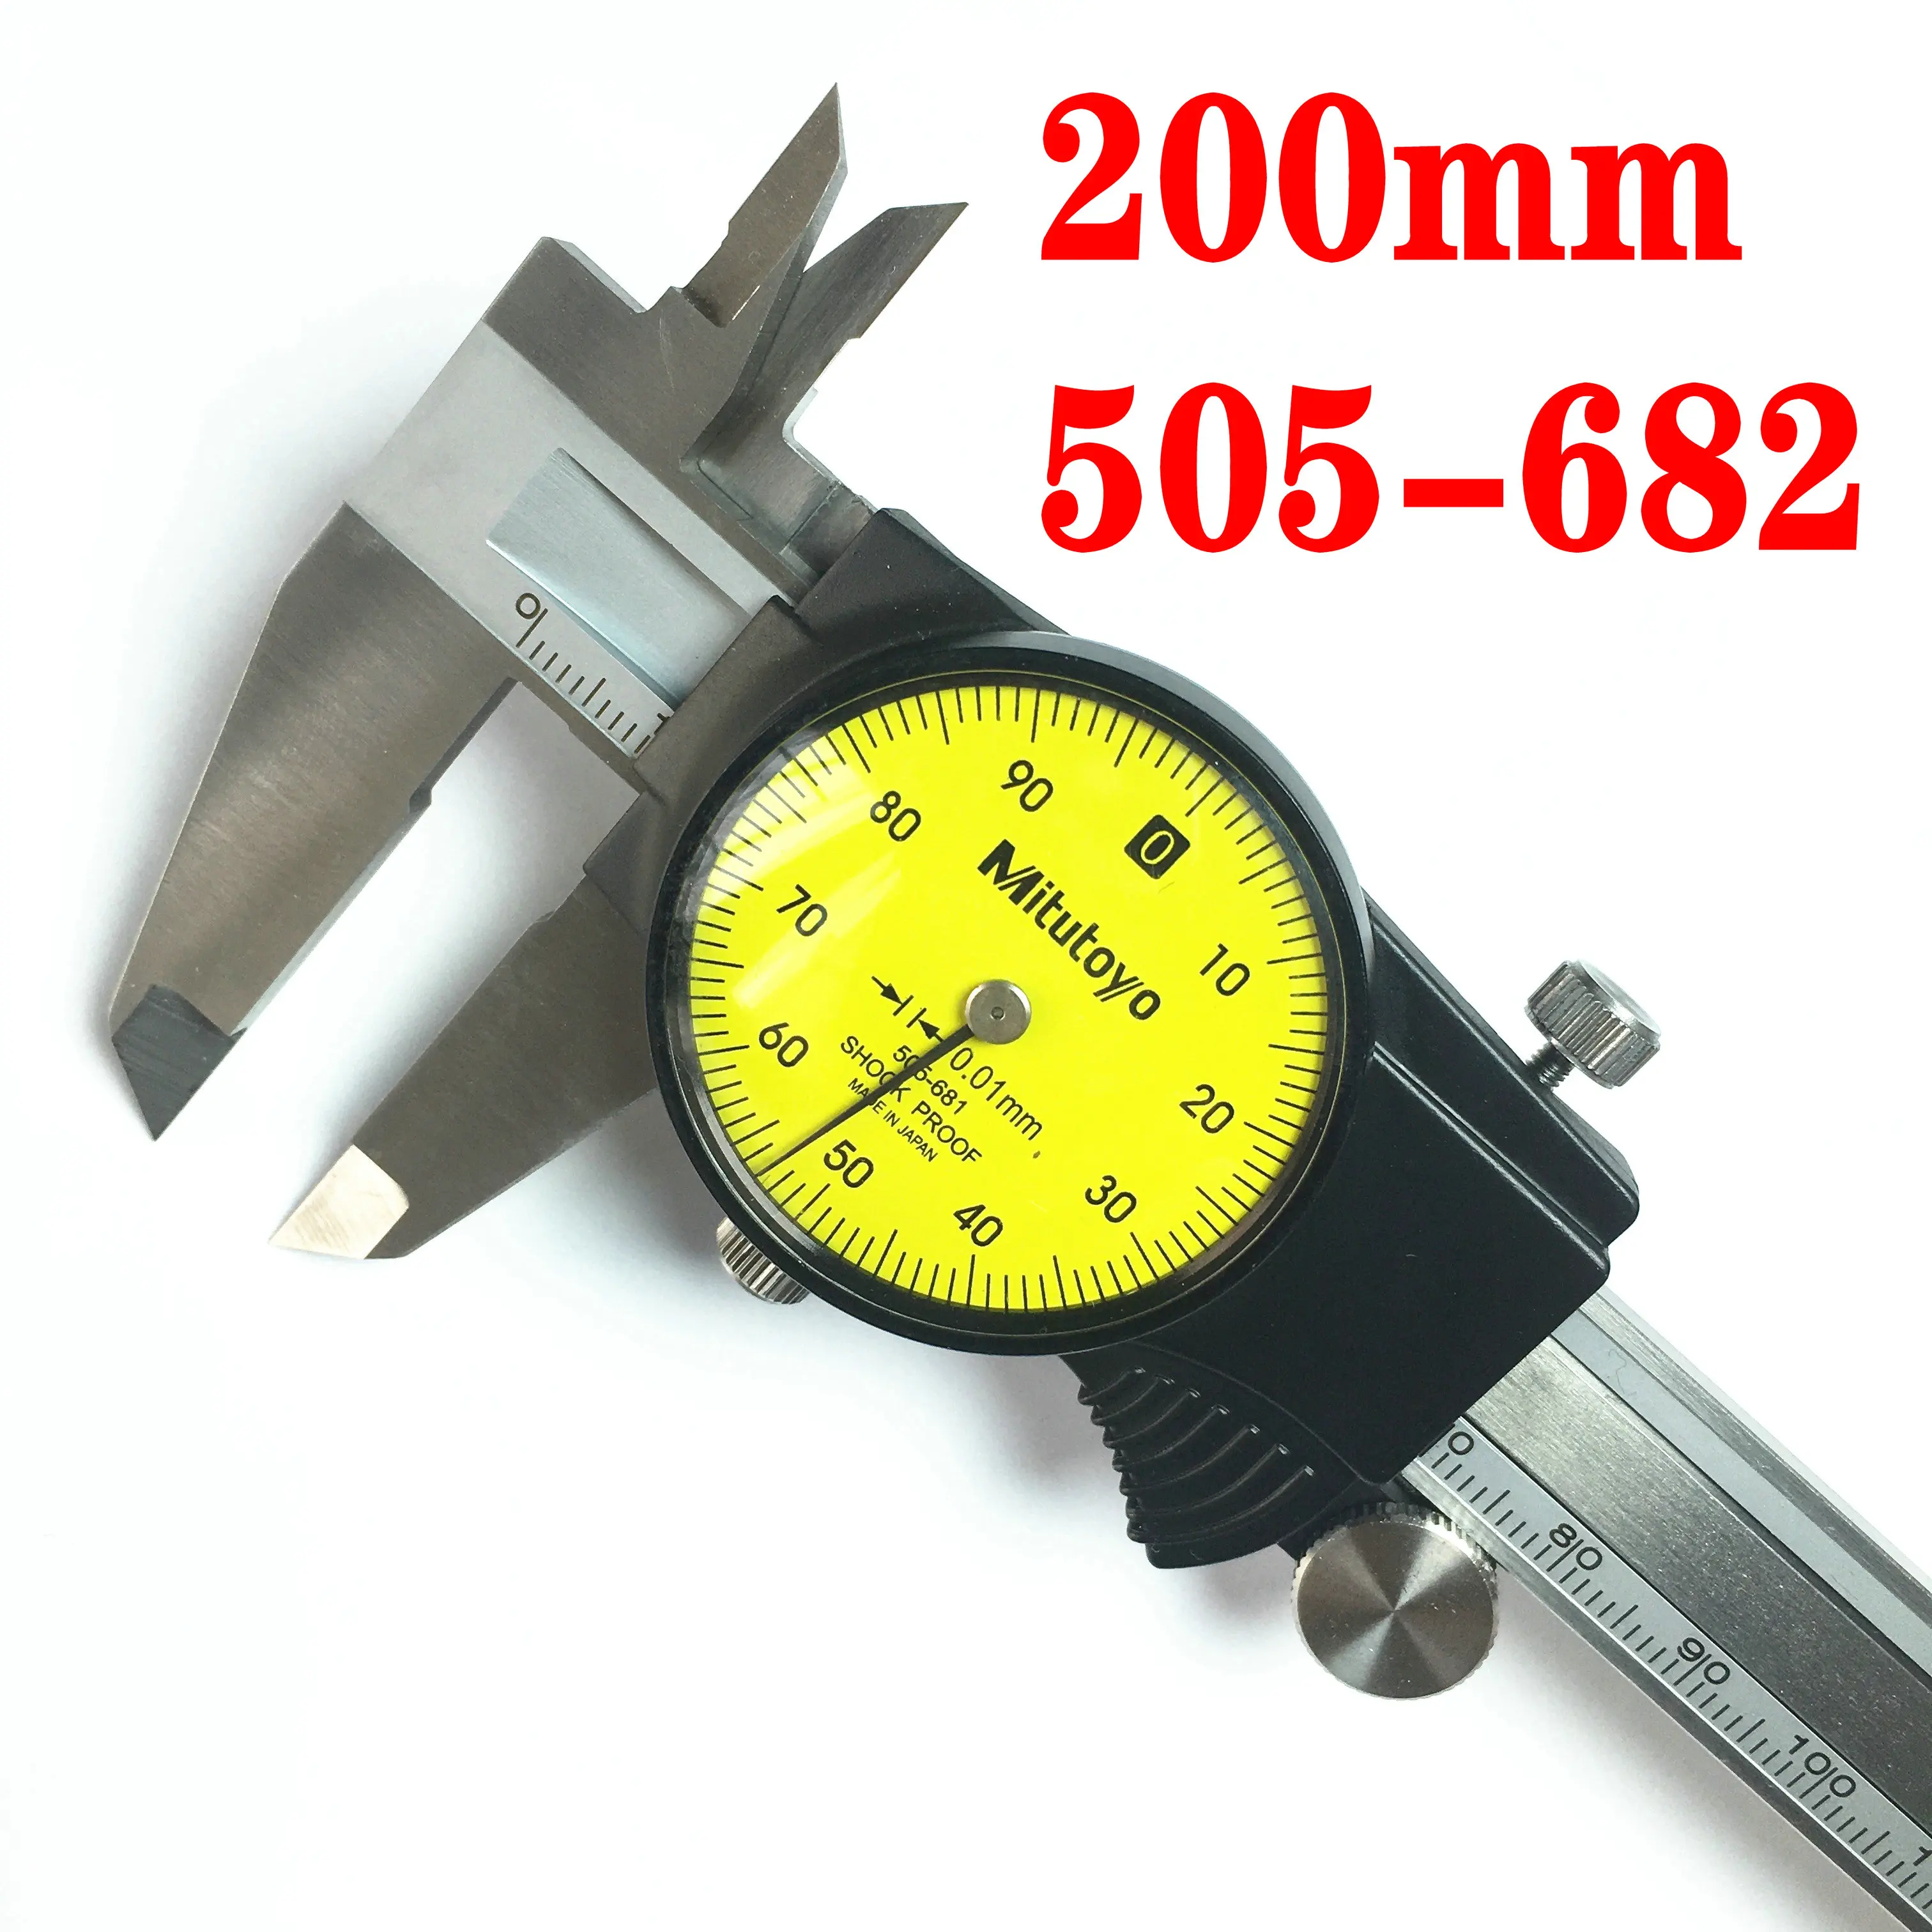 2023 NEW Dial Caliper 505-681 0-150mm 505-682 0-200mm 0.01mm Micrometer Measuring Stainless Steel Tools SHOCK PROOF